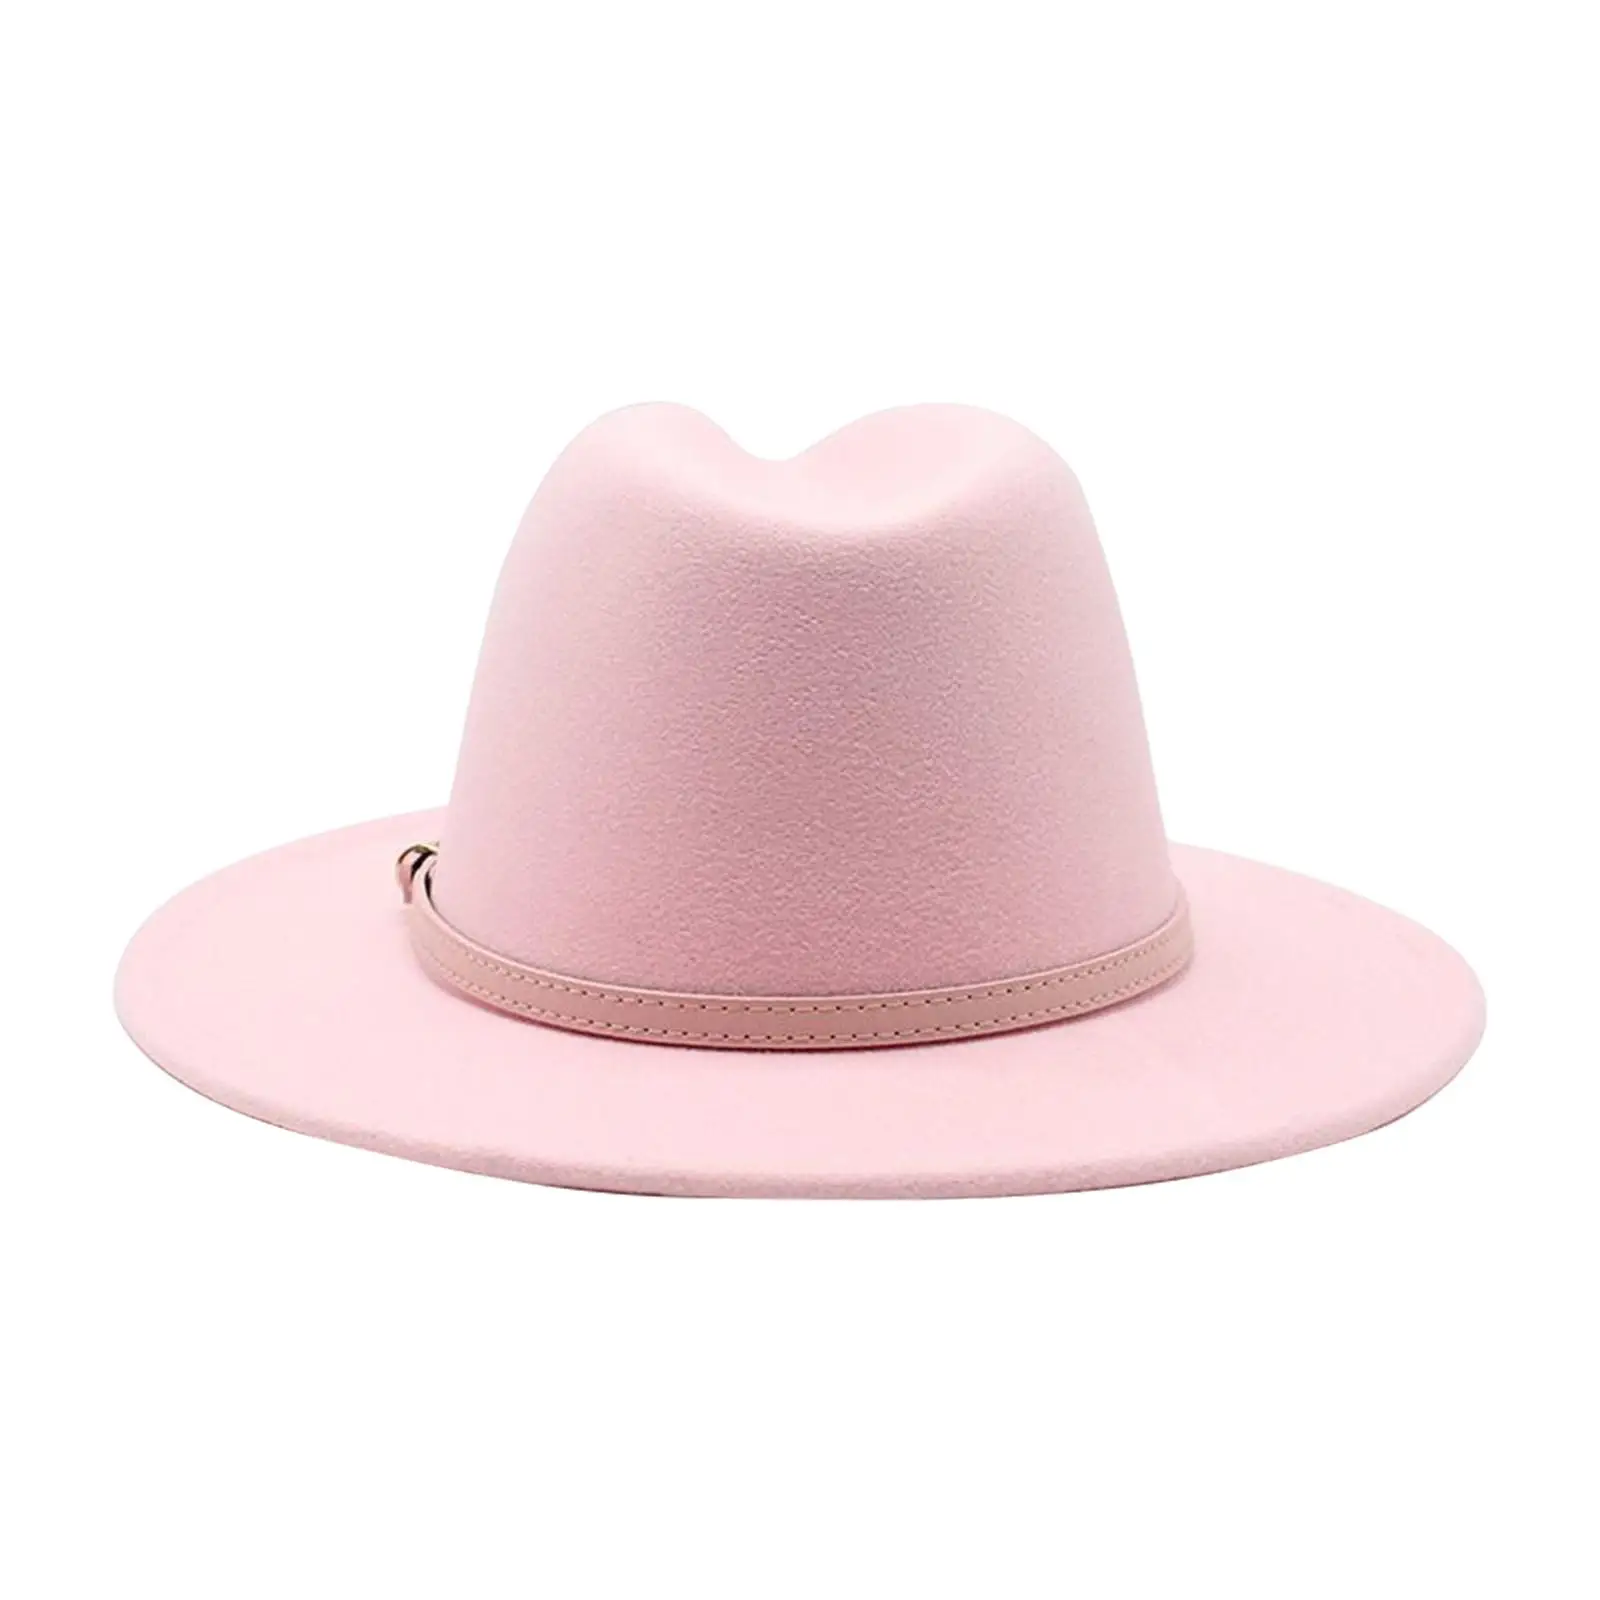 Women Fedora Hats Fashionable Costume Accessory Cowgirl Cap Panama Hat for Adults Stage Performance Autumn Winter Wedding Beach